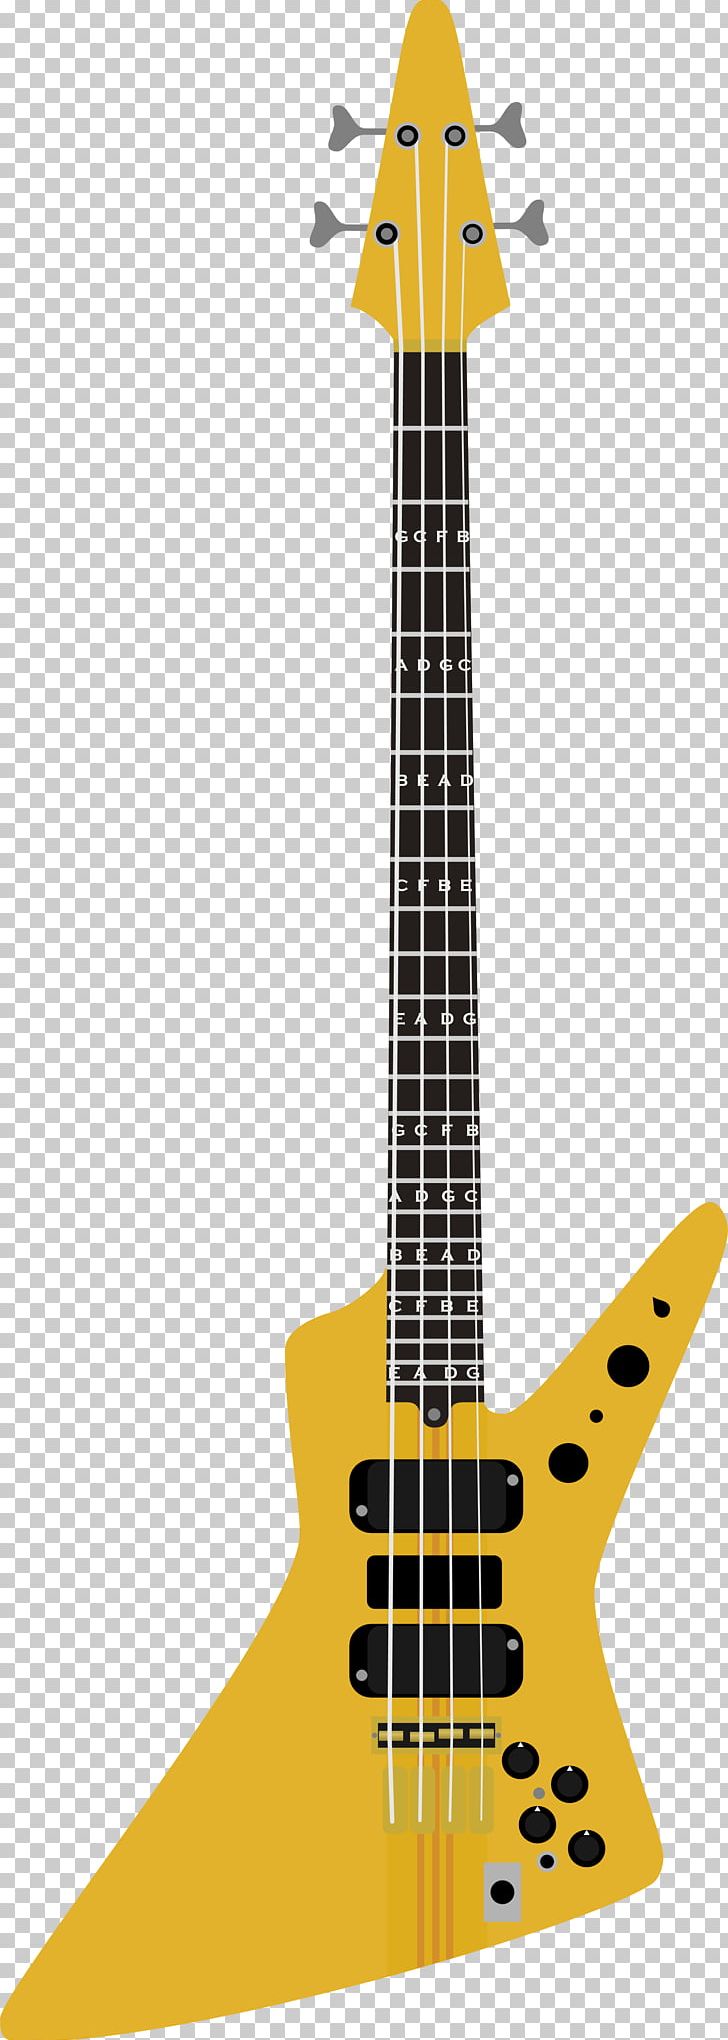 Bass Guitar Musical Instruments String Instruments Acoustic Guitar PNG, Clipart, Acoustic Electric Guitar, Double Bass, Giraffe, Guitar Accessory, John Free PNG Download